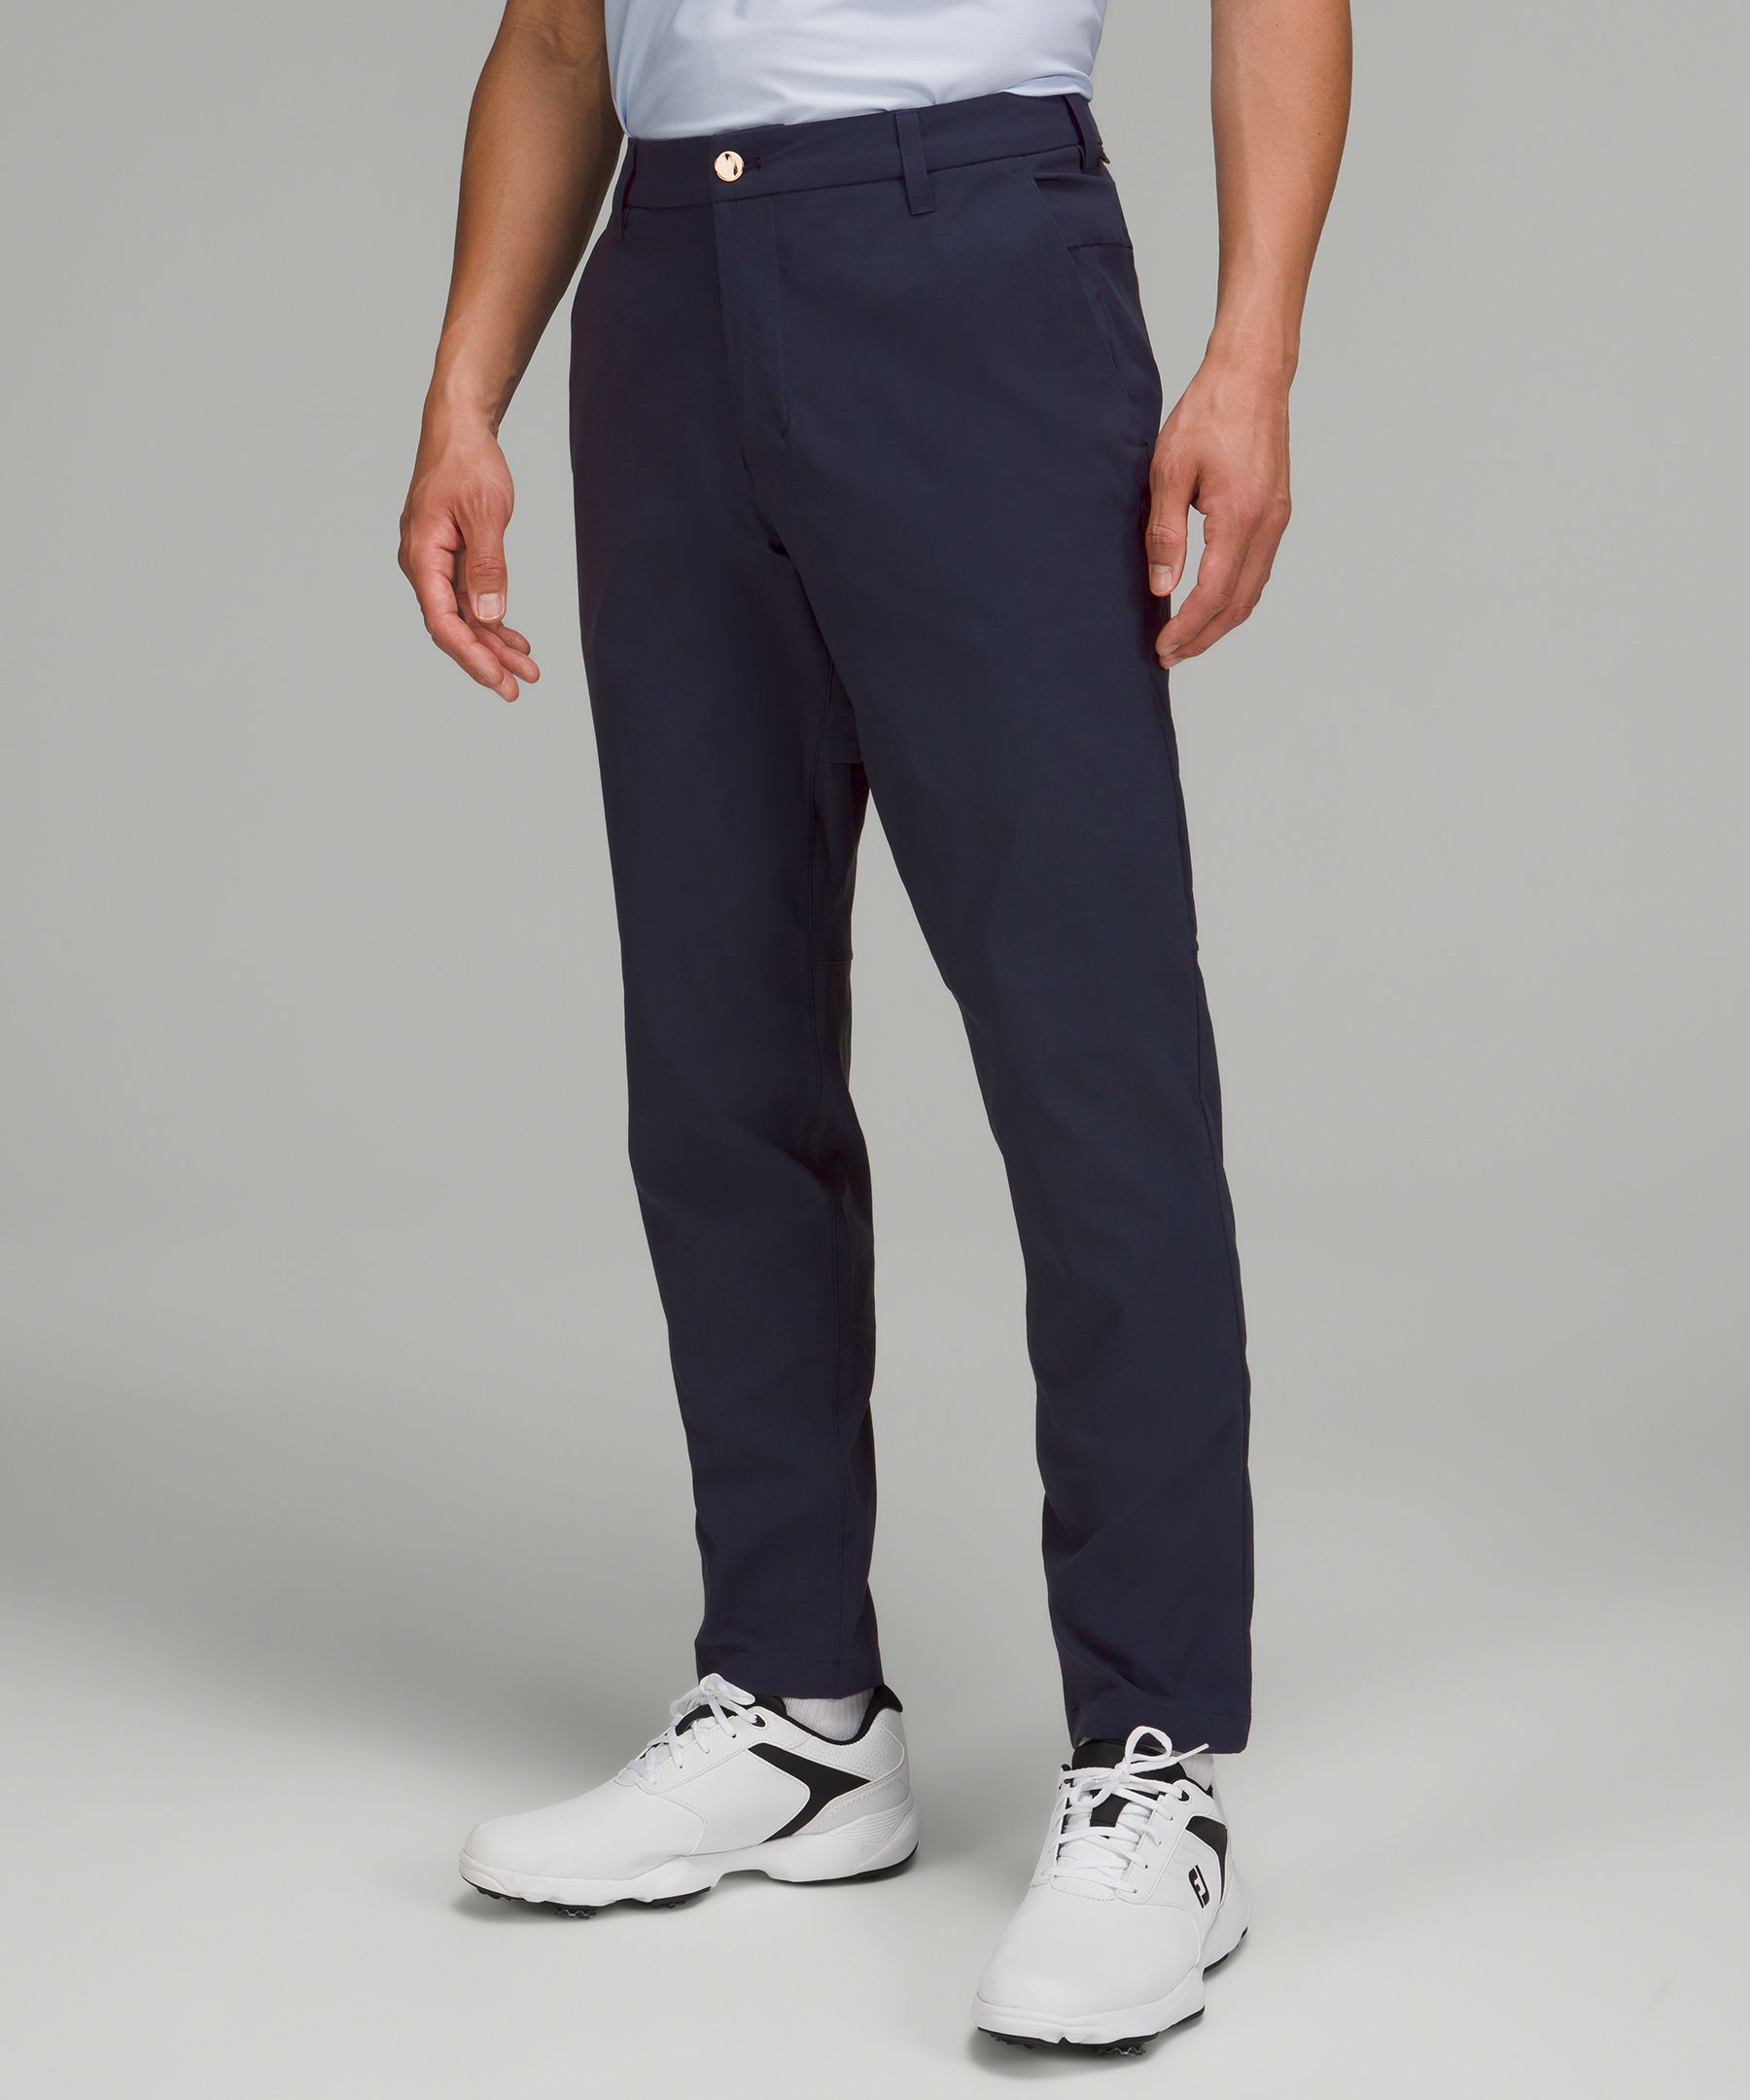 Lululemon Commission Golf Pants In Classic Navy